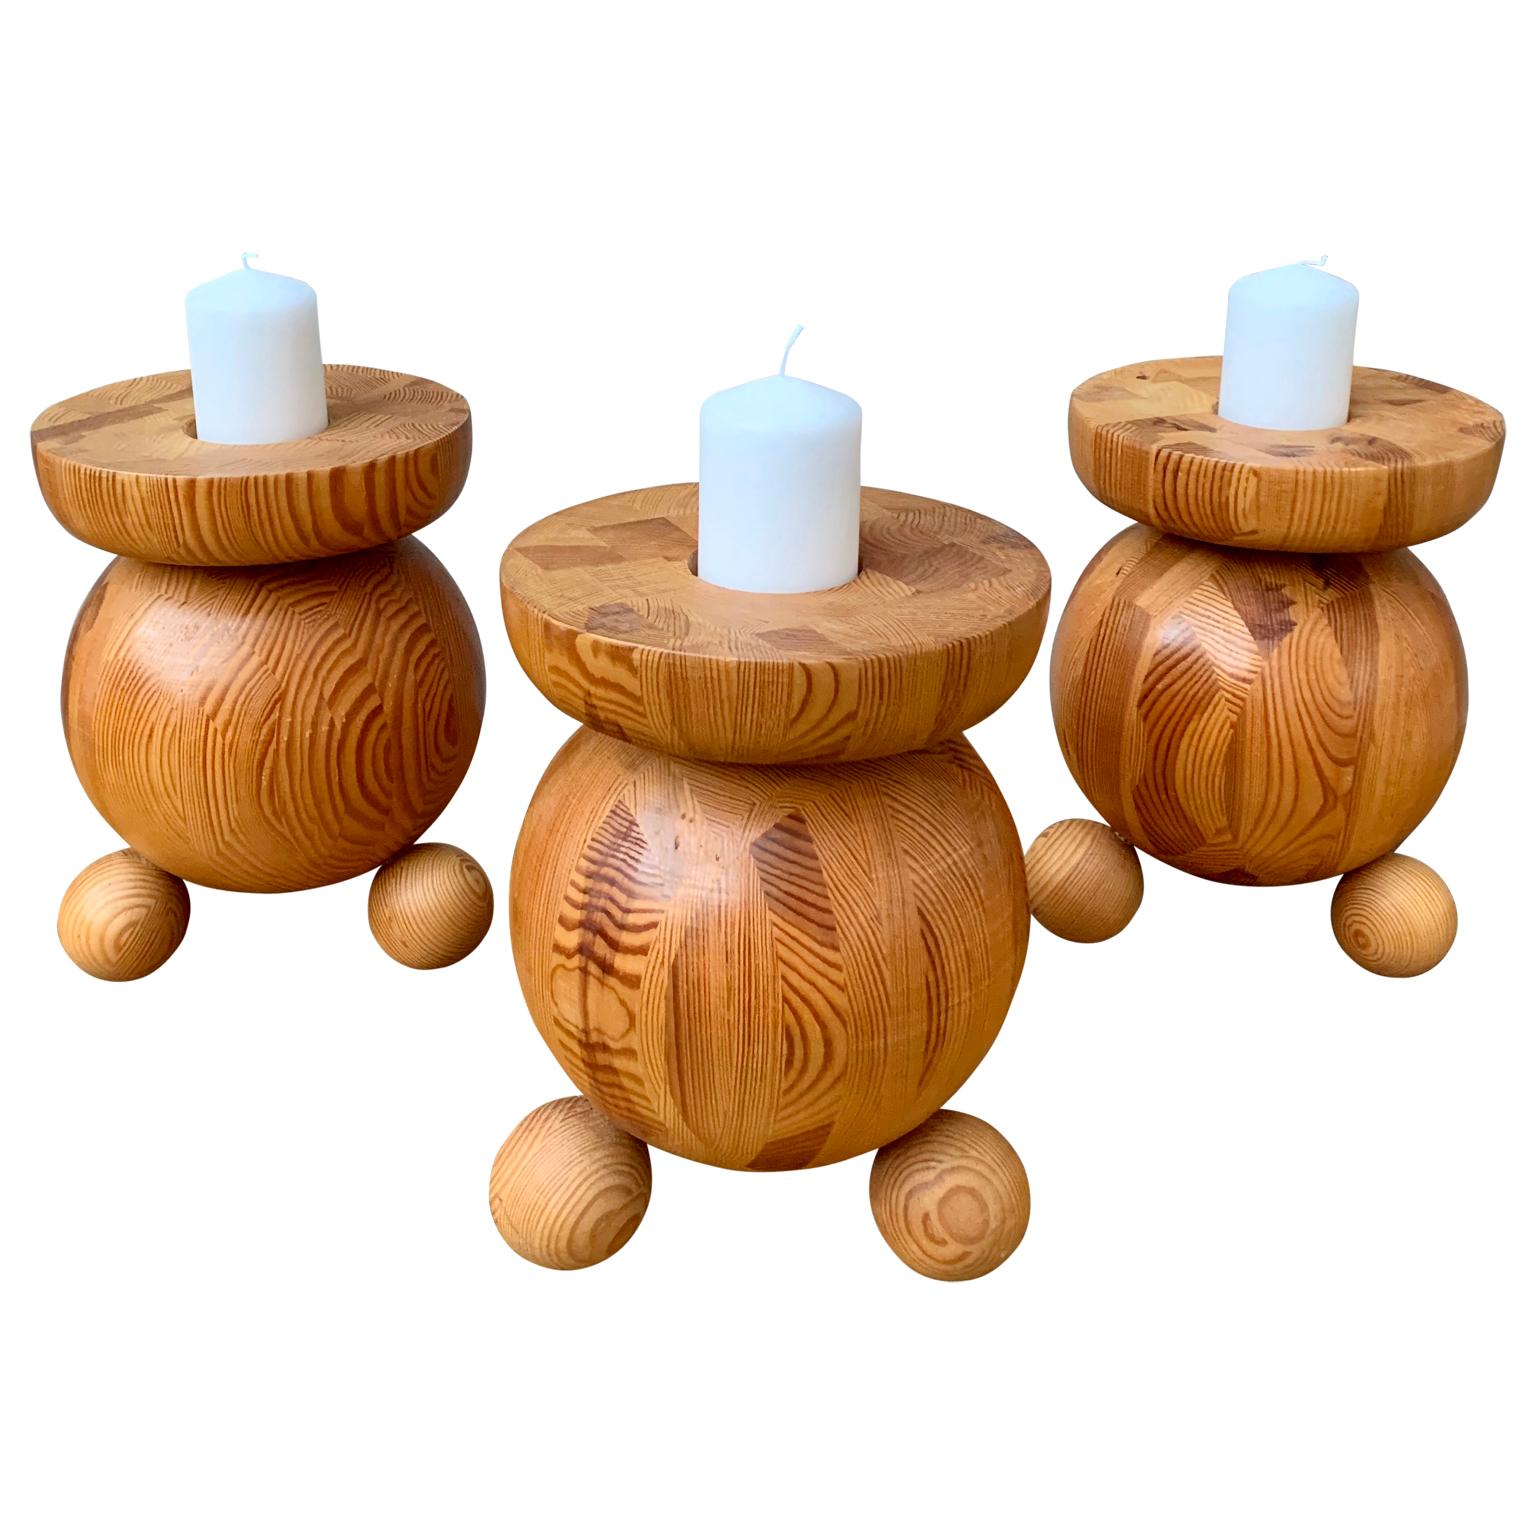 A set of 3 Swedish very large wooden candleholders from the 1970s. The massive candlesticks are made in thick pine wood and each supports one 2 1/2 inch thick candle (6.5 centimeter diameter).